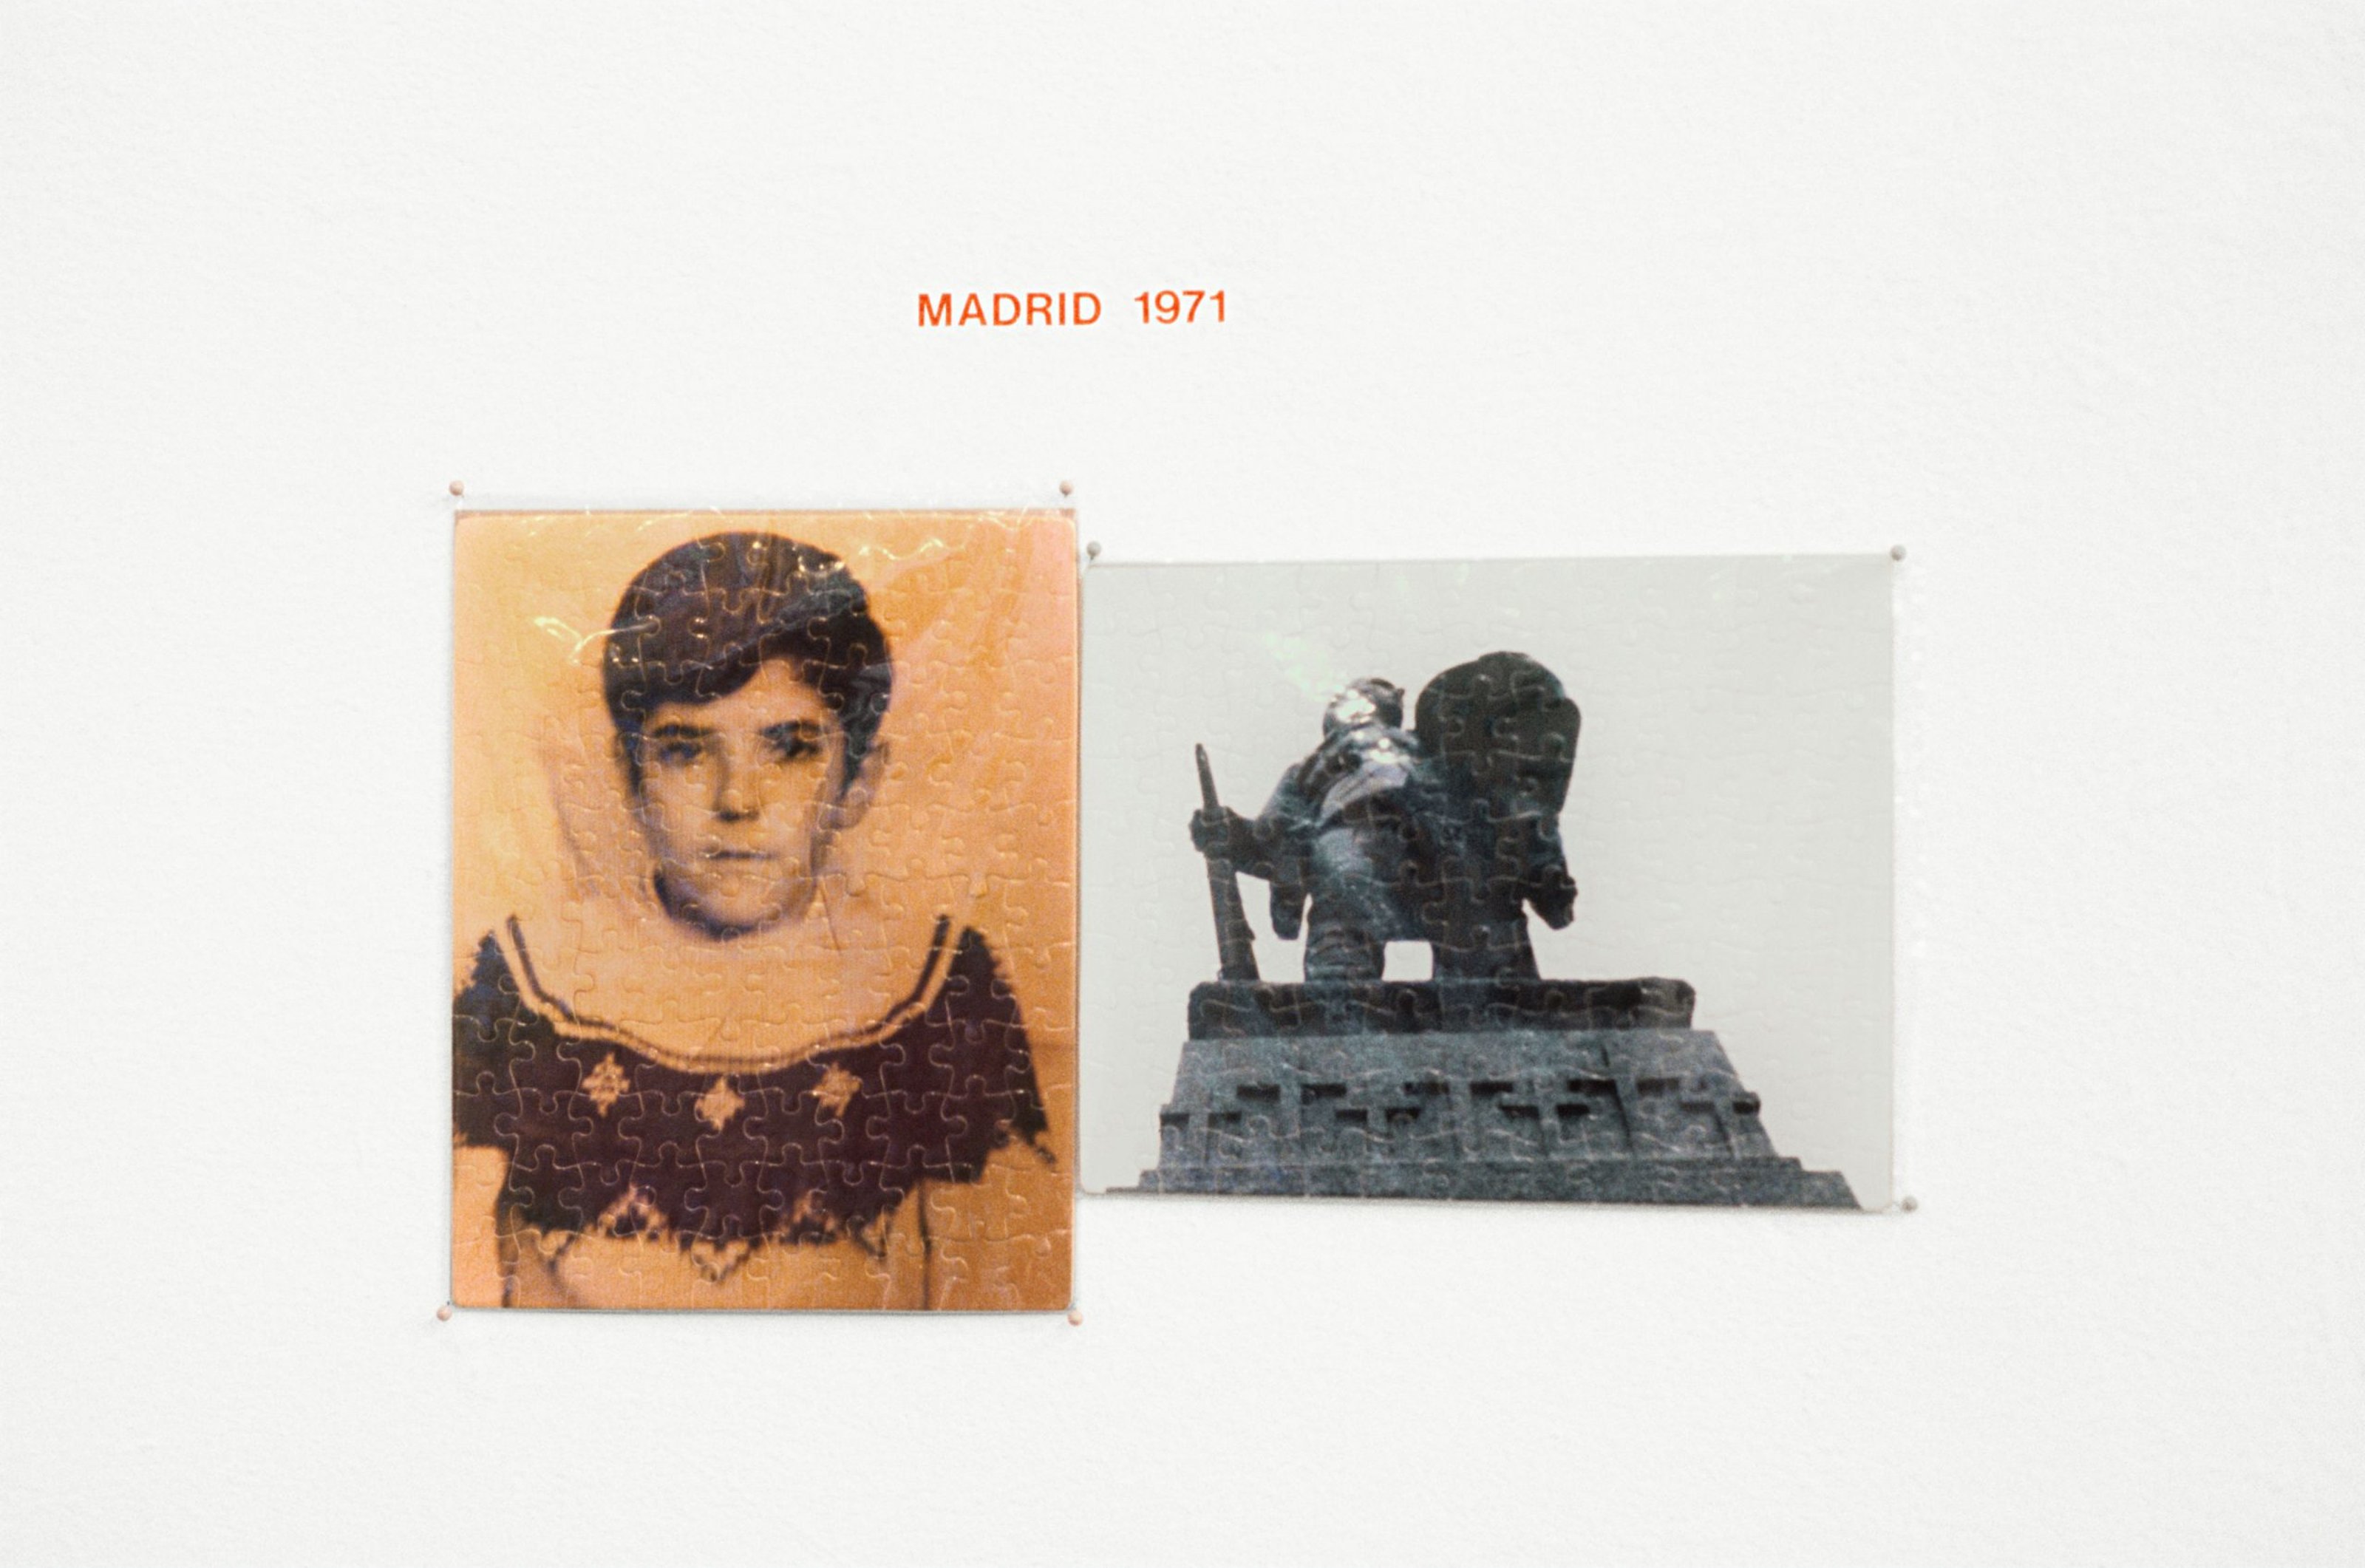 Two puzzles: on the left, a sepia-toned photograph of Felix Gonzalez-Torres as a young boy, and on the right, a black-and-white photograph of a statue from the ground level